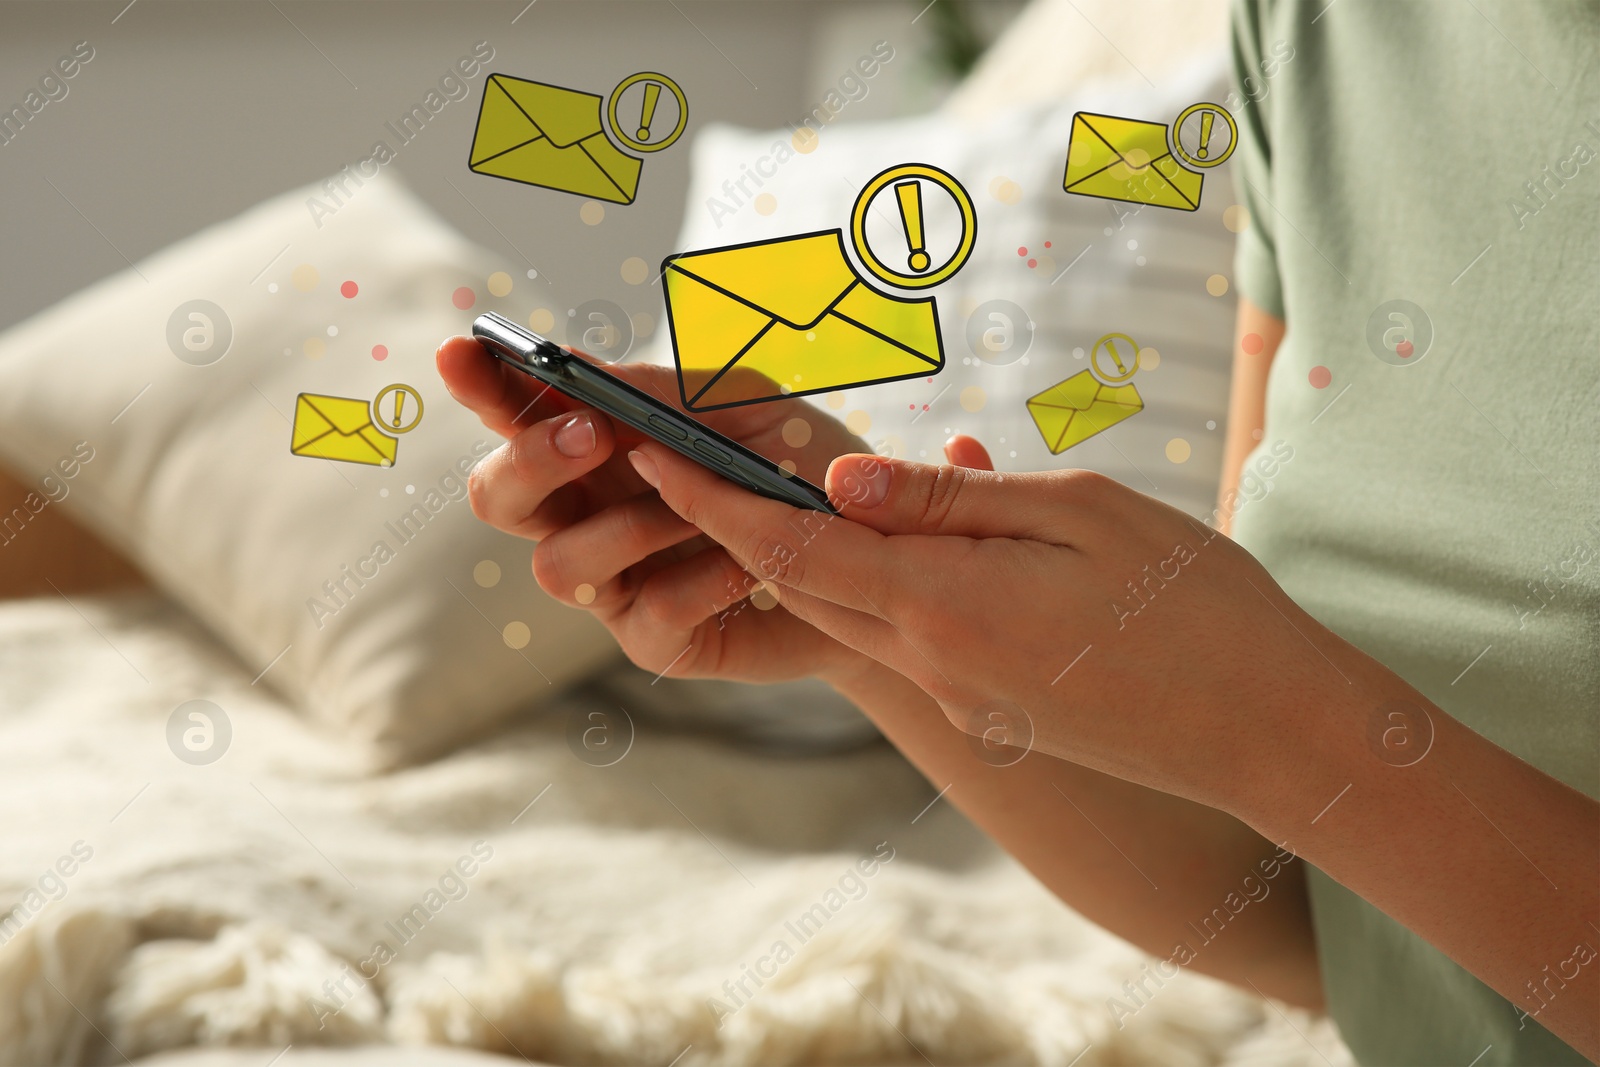 Image of Woman using smartphone at home, closeup. Spam message notifications above device, illustration